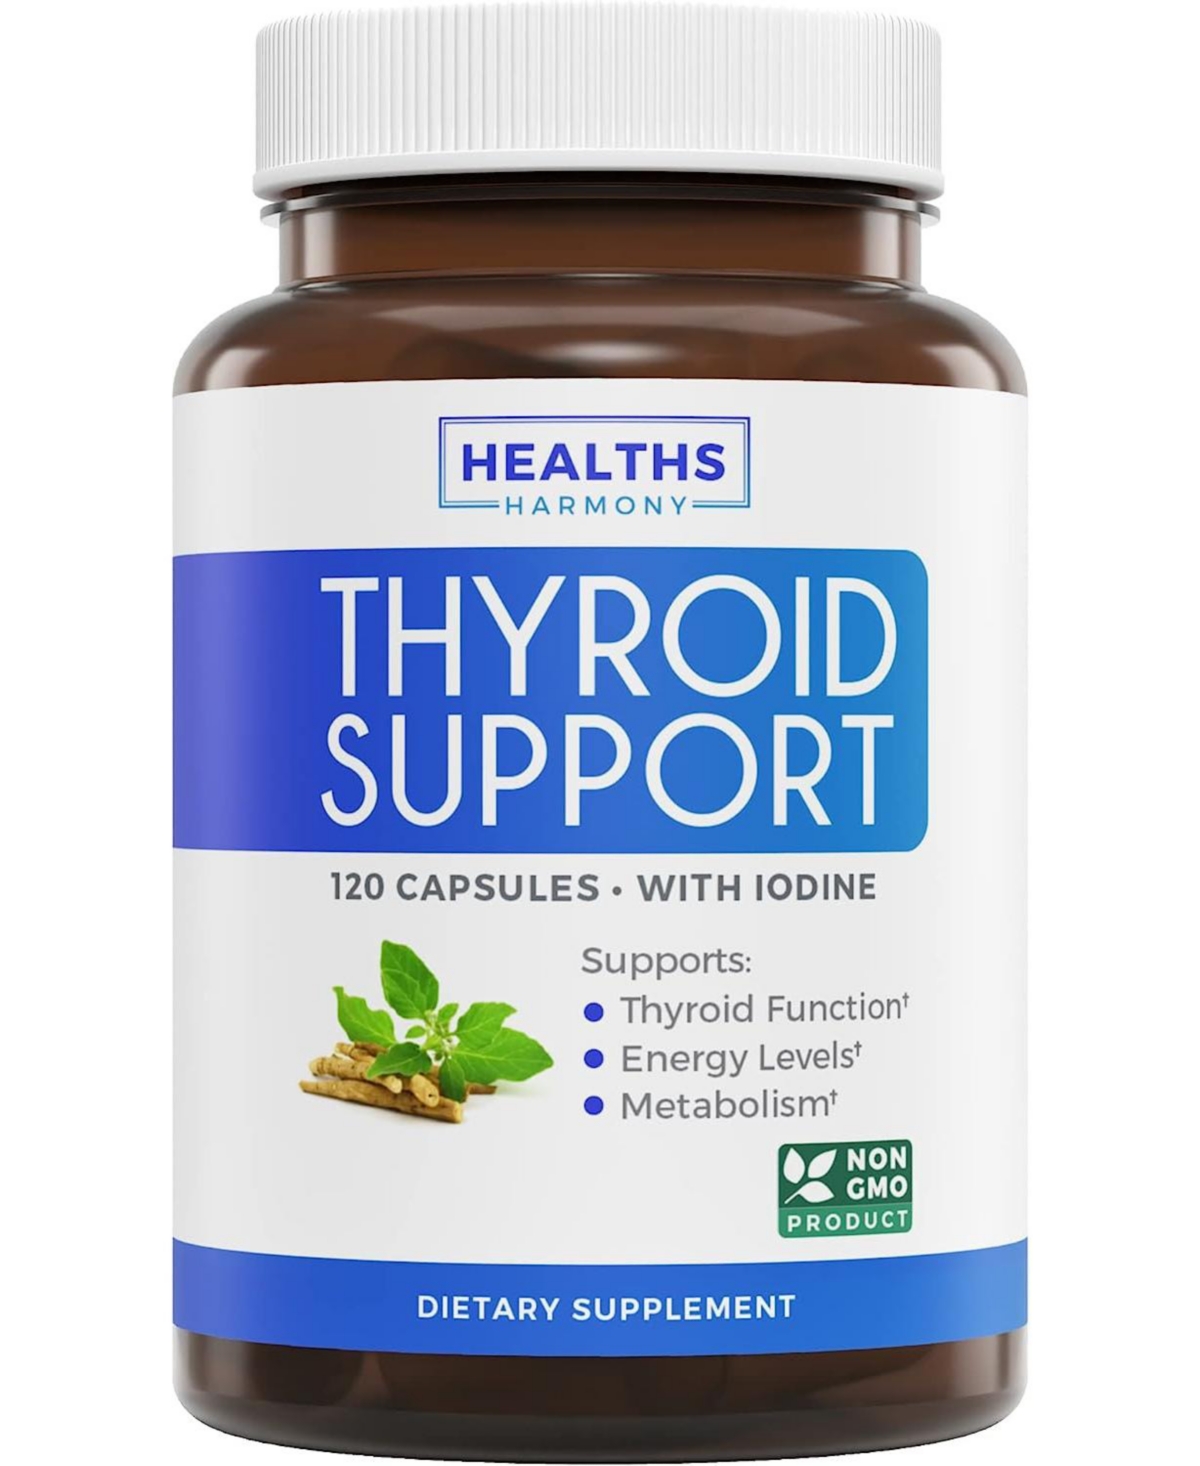 Thyroid Support with Iodine